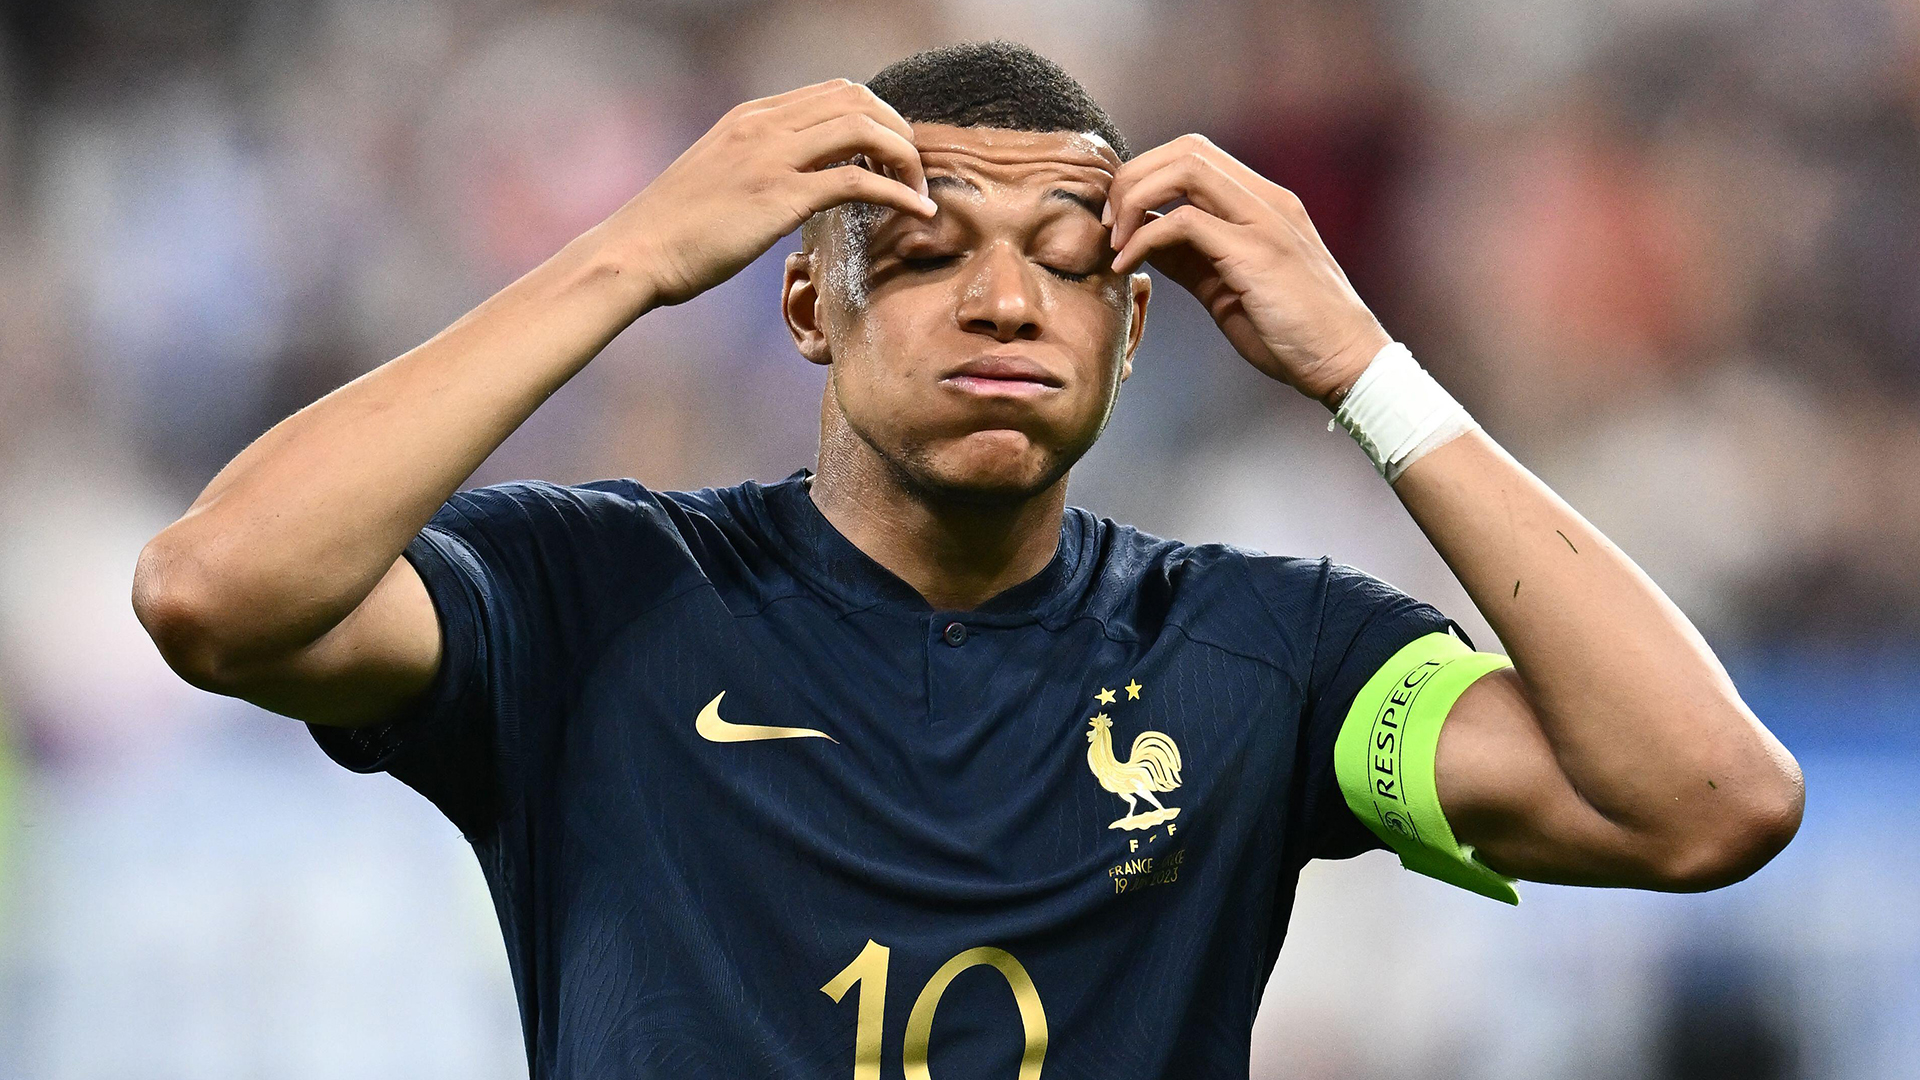 Footballer Kylian Mbappe of France and Paris St Germain has been the subject of transfer speculation